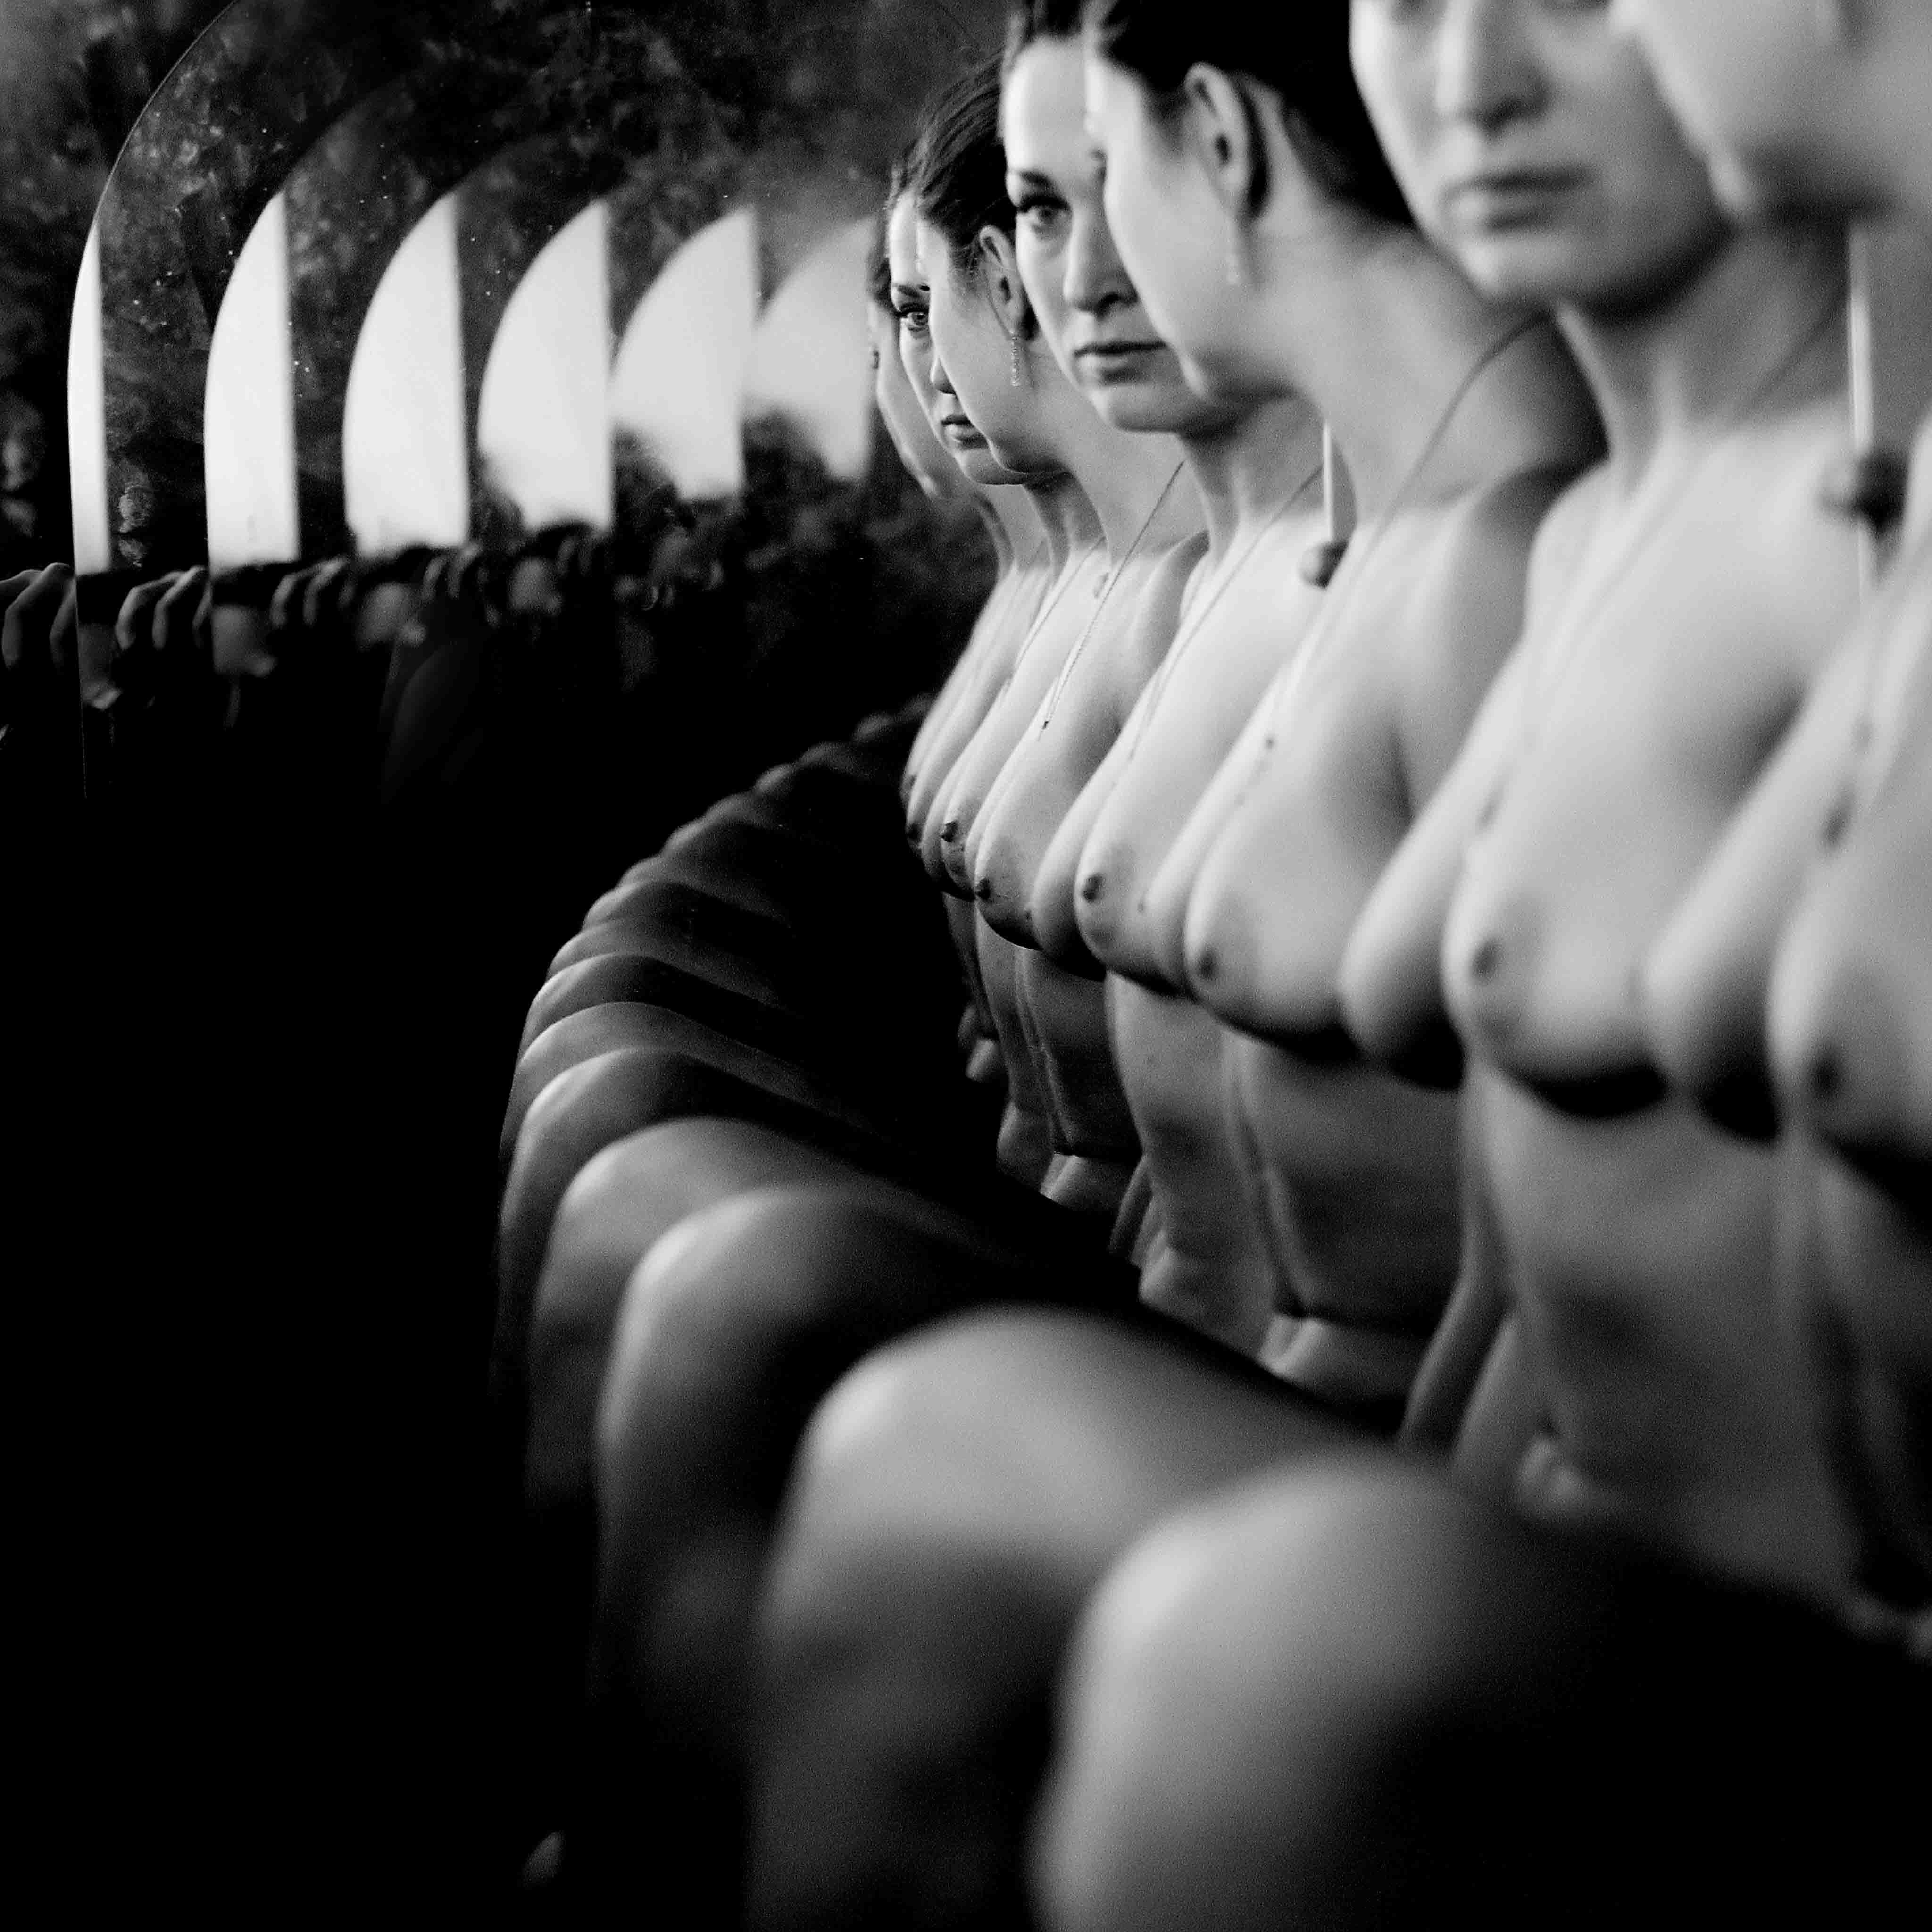 "Mirrors" Photography 31" x 31" inch Edition 1/7 by Olha Stepanian

Printed on Epson Professional Paper
Signed and numbered by the artist 

Not framed. Ships in a tube. 

Available sizes:	
Edition of 15:	24" x 24" inch
Edition of 7:	31" x 31"